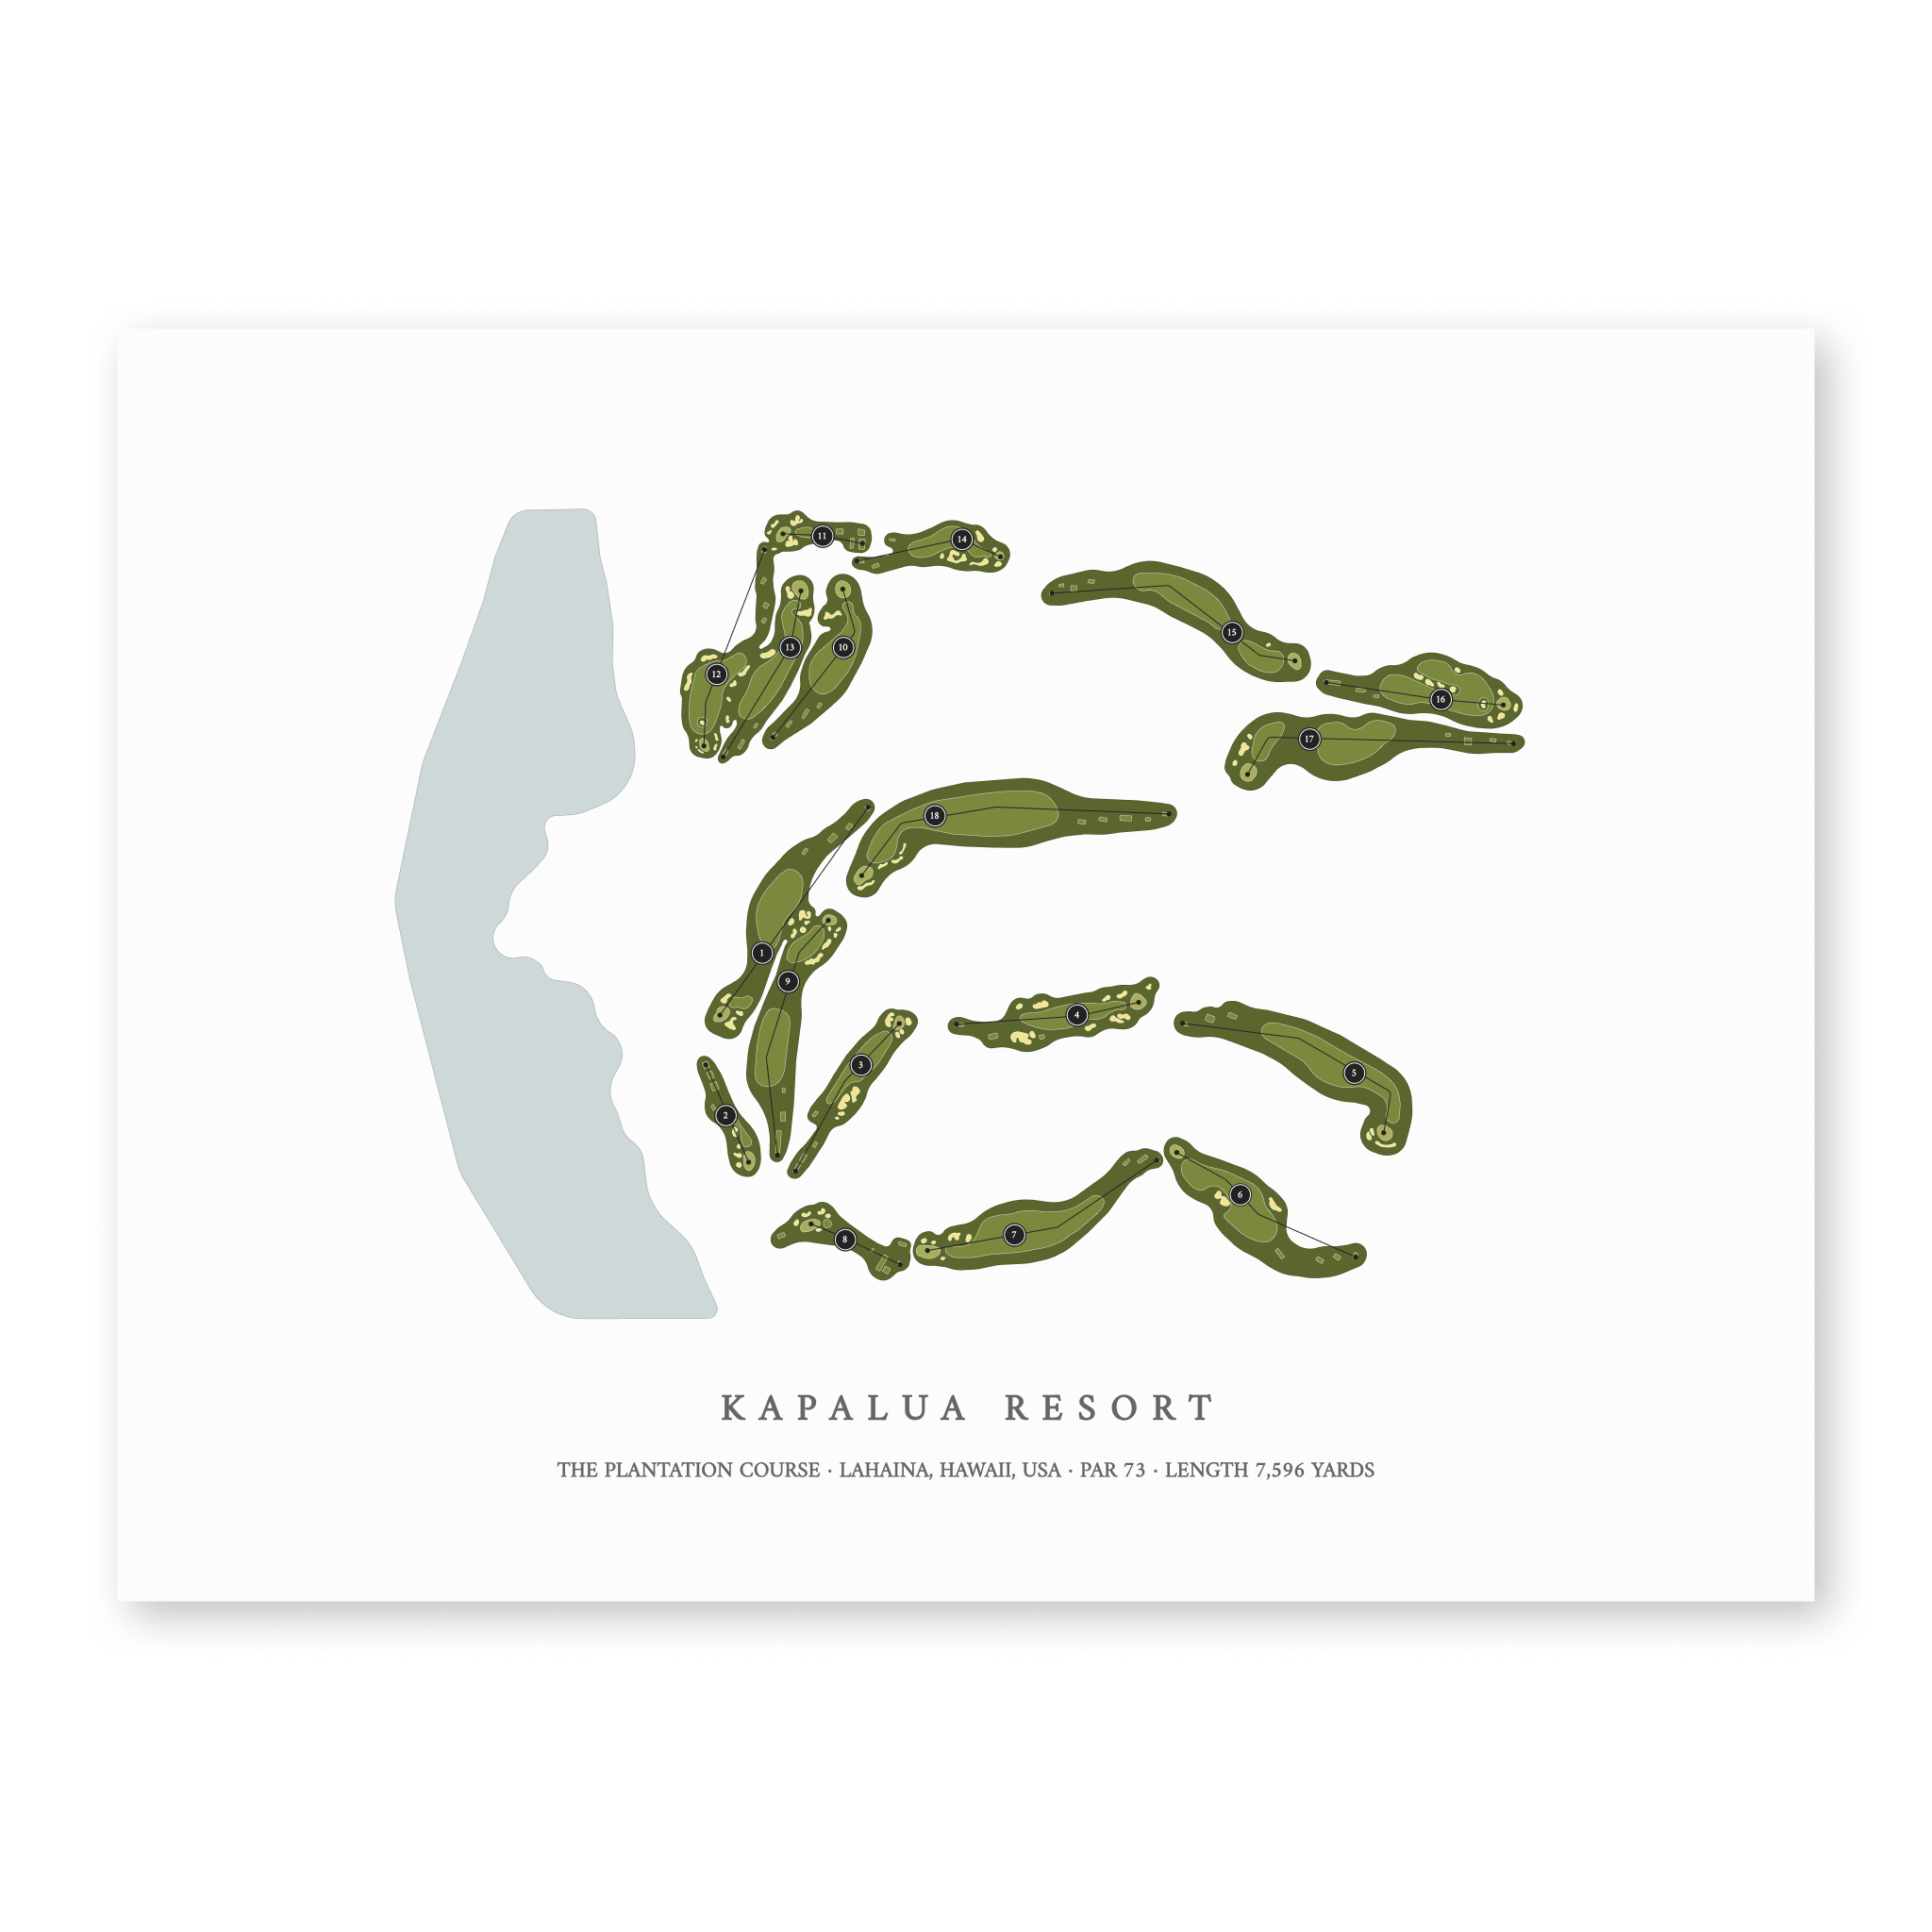 Kapalua Resort - The Plantation Course| Golf Course Print | Unframed With Hole Numbers #hole numbers_yes